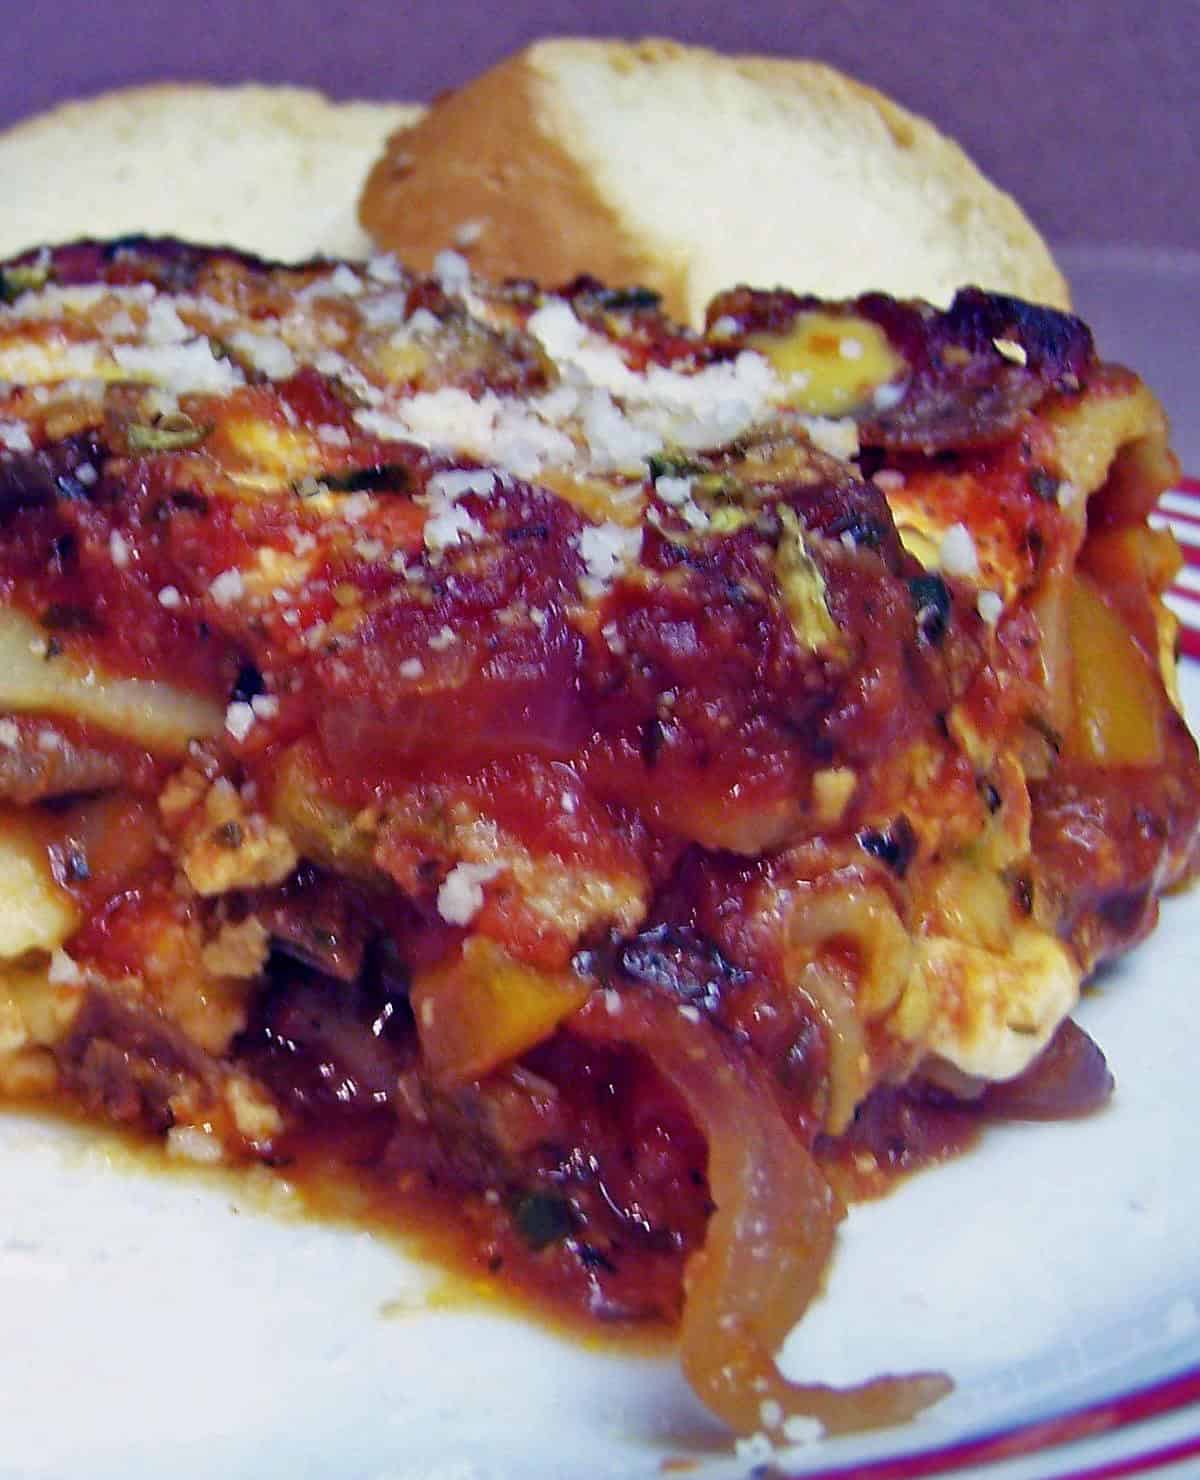  Layers upon layers of savory goodness, Cheese Steak-Yumm Lasagna With the Works is the ultimate comfort food.